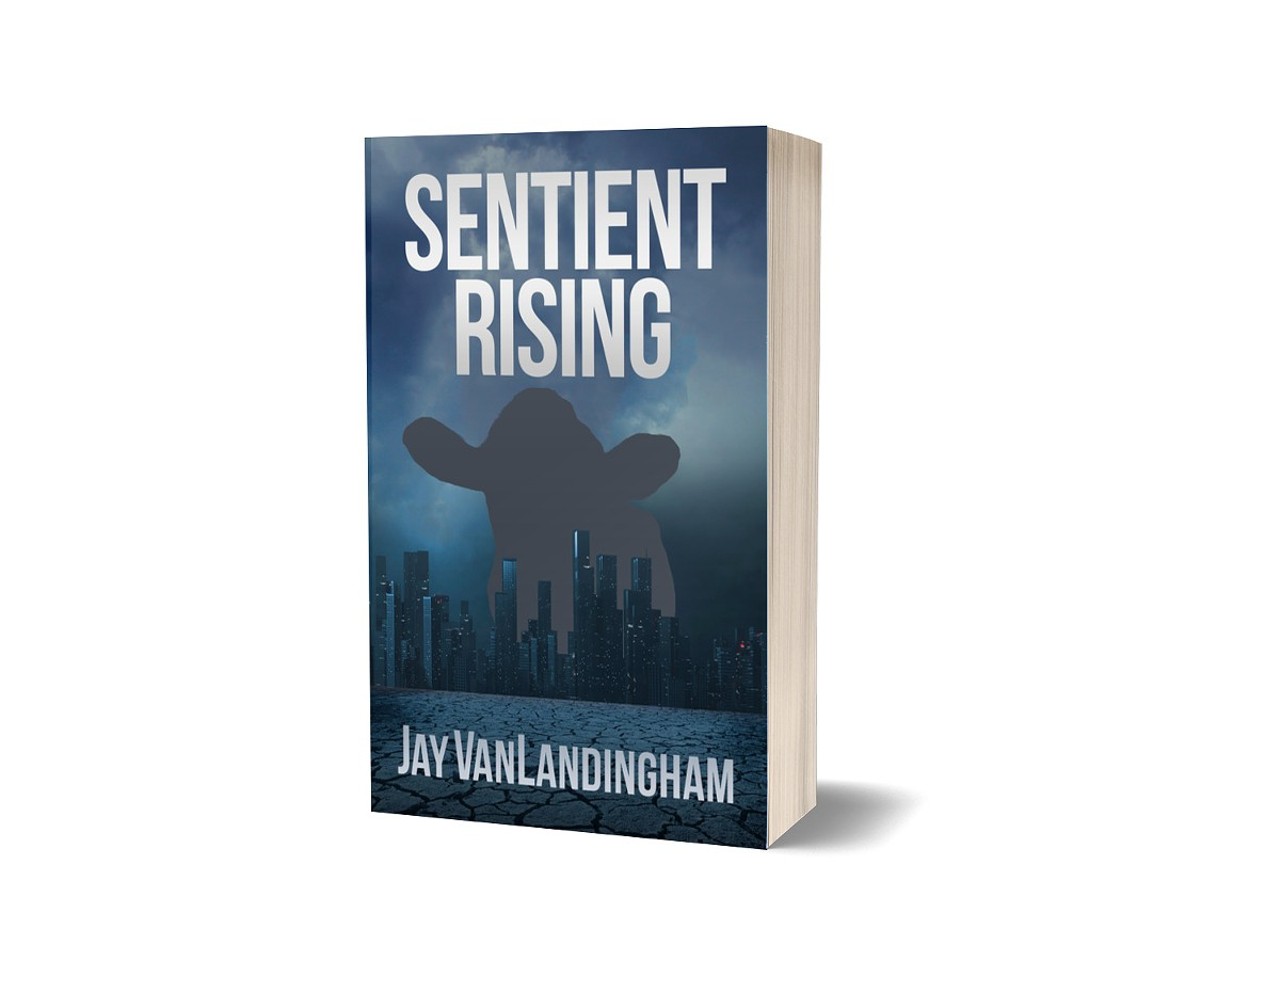 Sentient Rising Pre-Launch Fundraiser for Transgender Advocacy Council 
When: Sept. 30 from 3-5 p.m.
Where: Third Way Peace Fellowship, Northside
What: Book signing and charitable event.
Who: Local author Jay VanLandingham
Why: $5 from every ticket sale benefits the Transgender Advocacy Council.